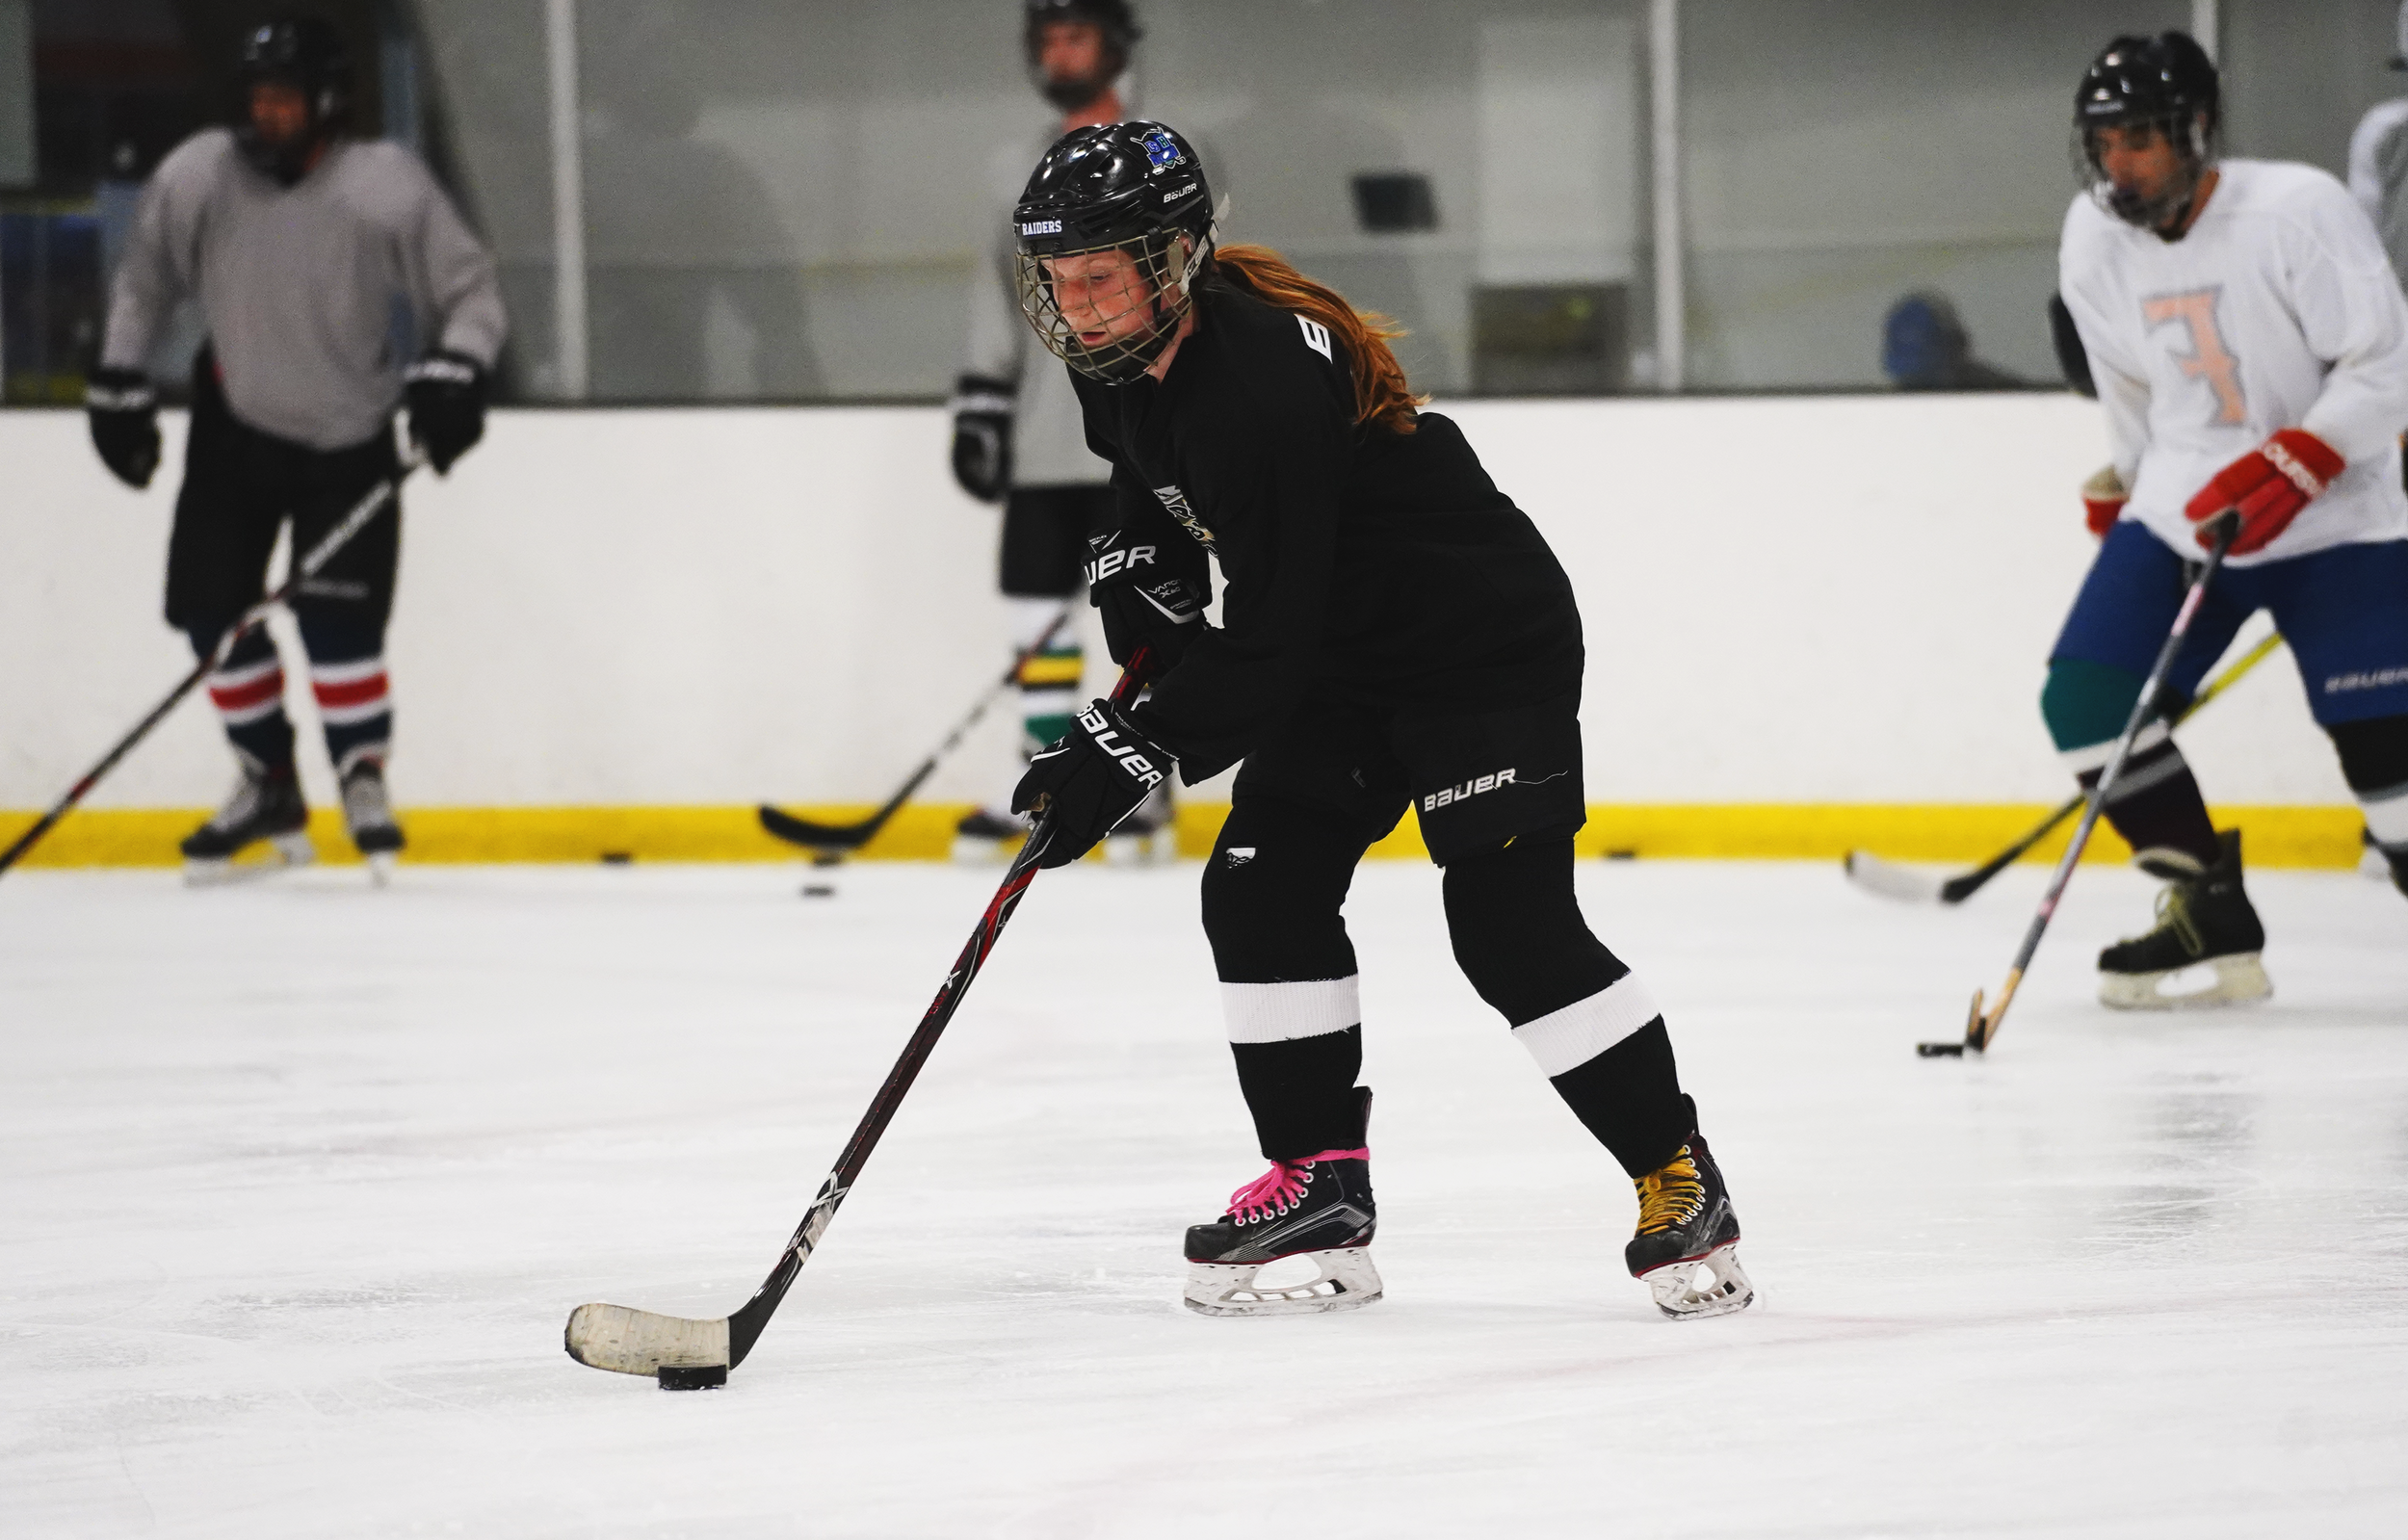 Female hockey players join Chapmans predominantly male team — The Panther Newspaper